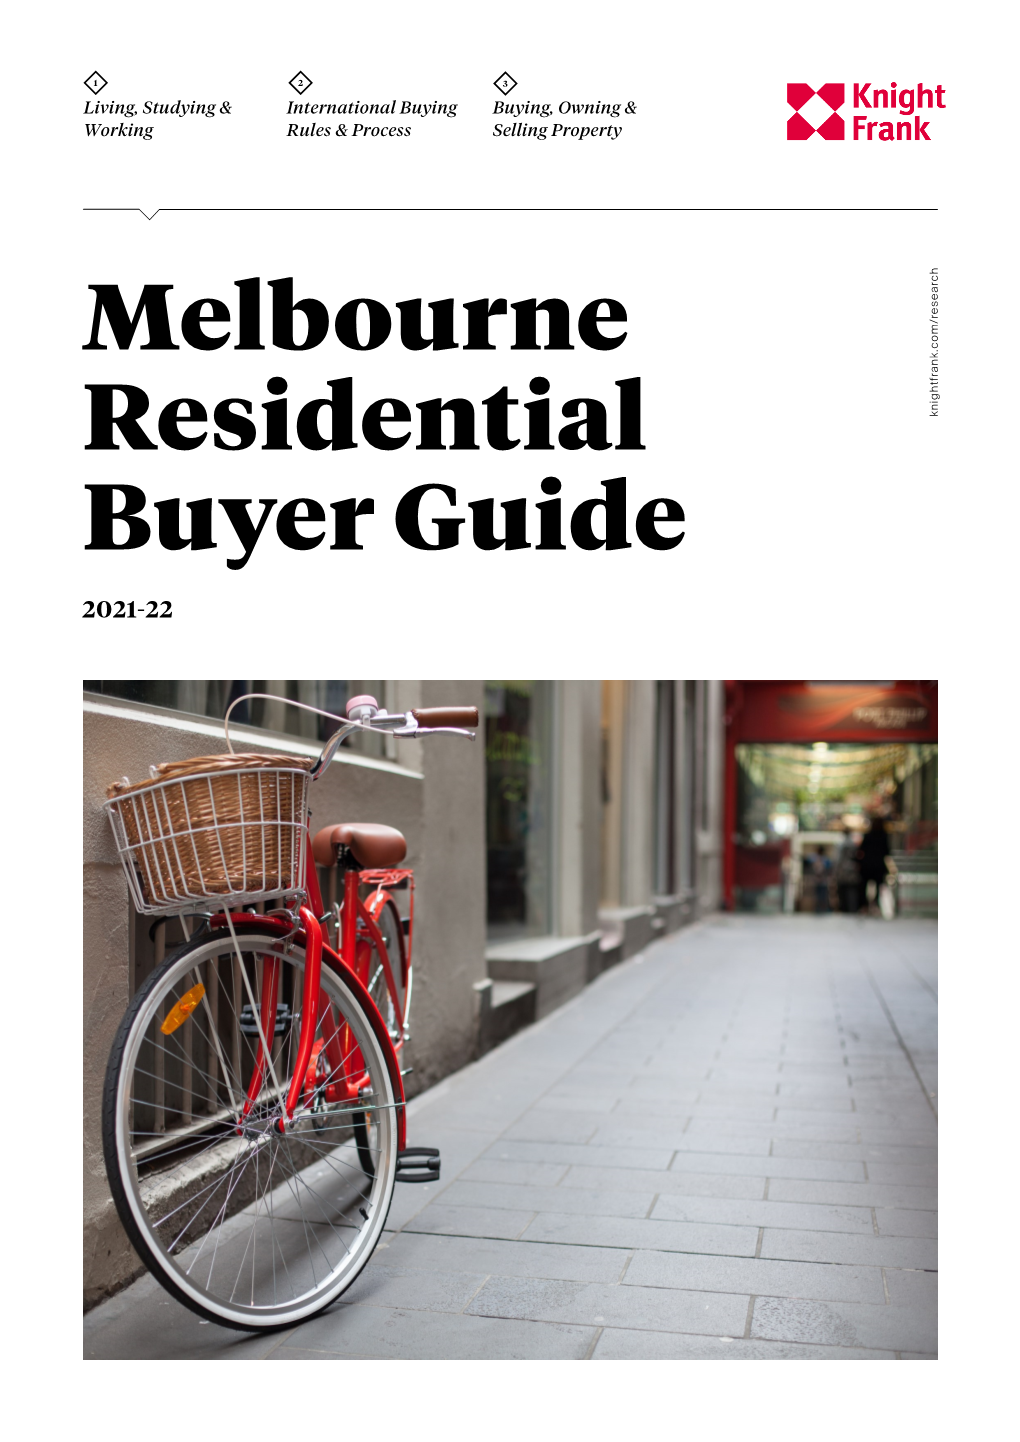 Melbourne Residential Buyer Guide